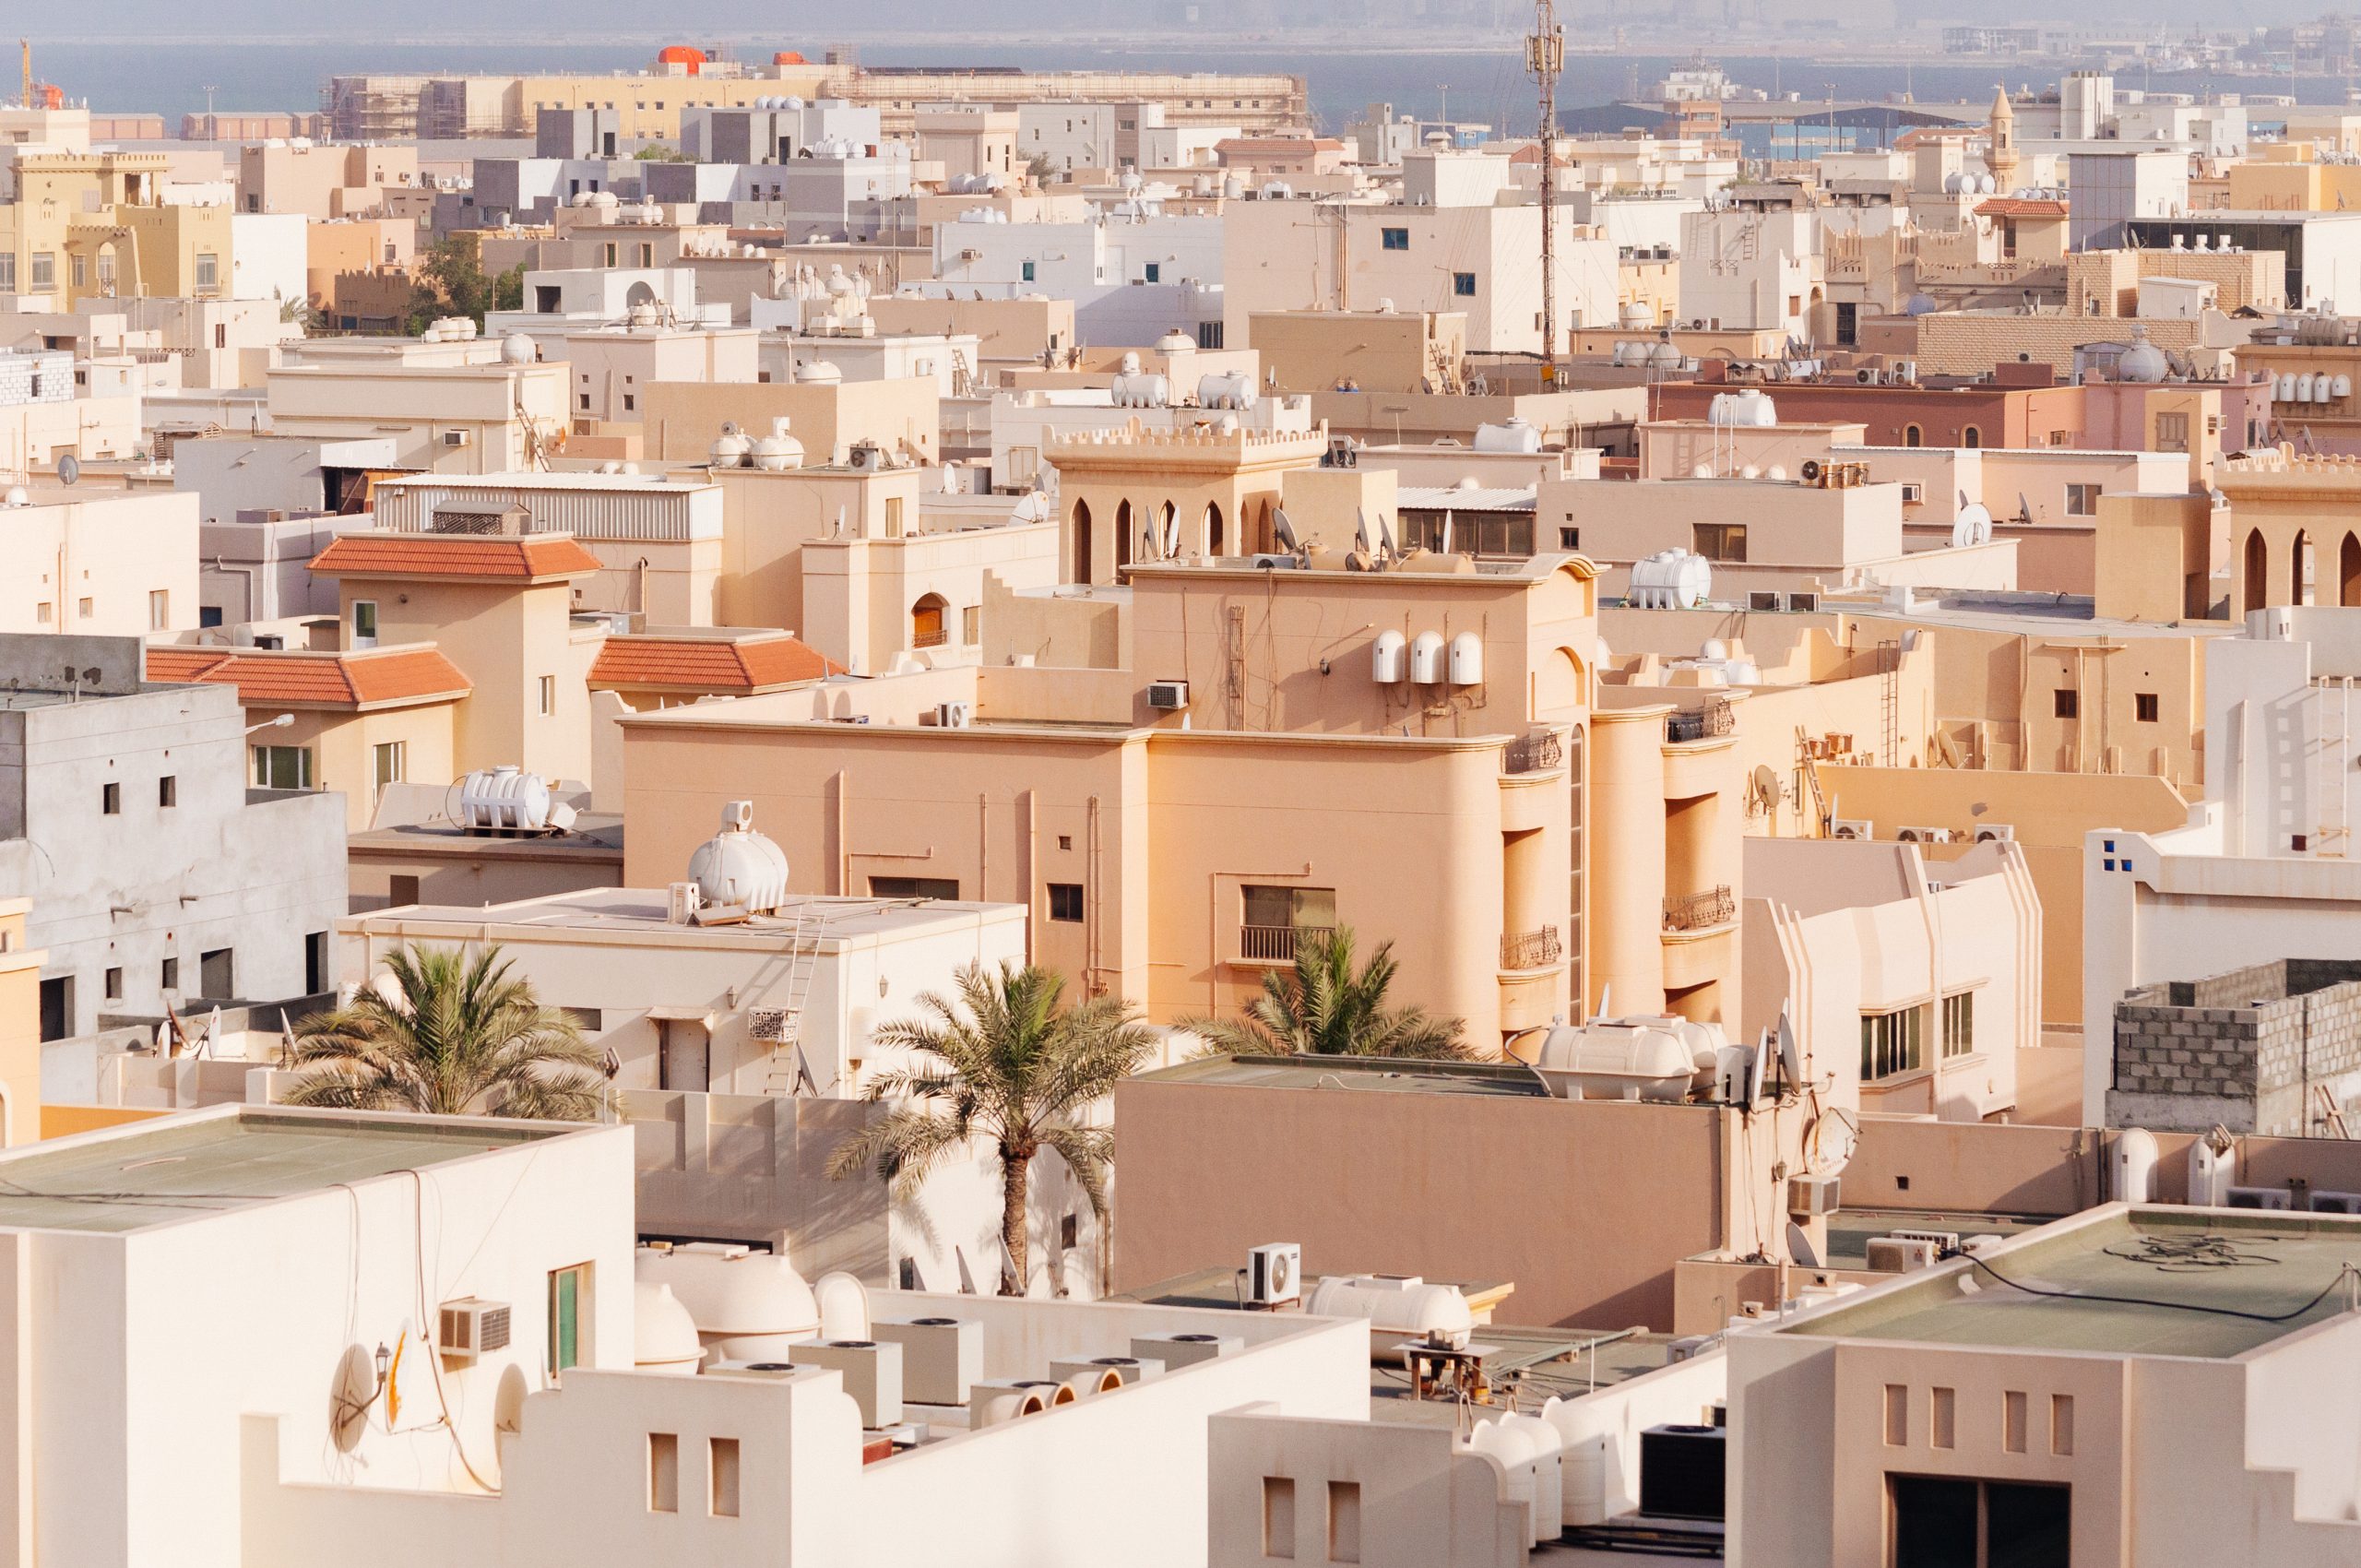 Photograph of the rooftops of villas in Bahrain.